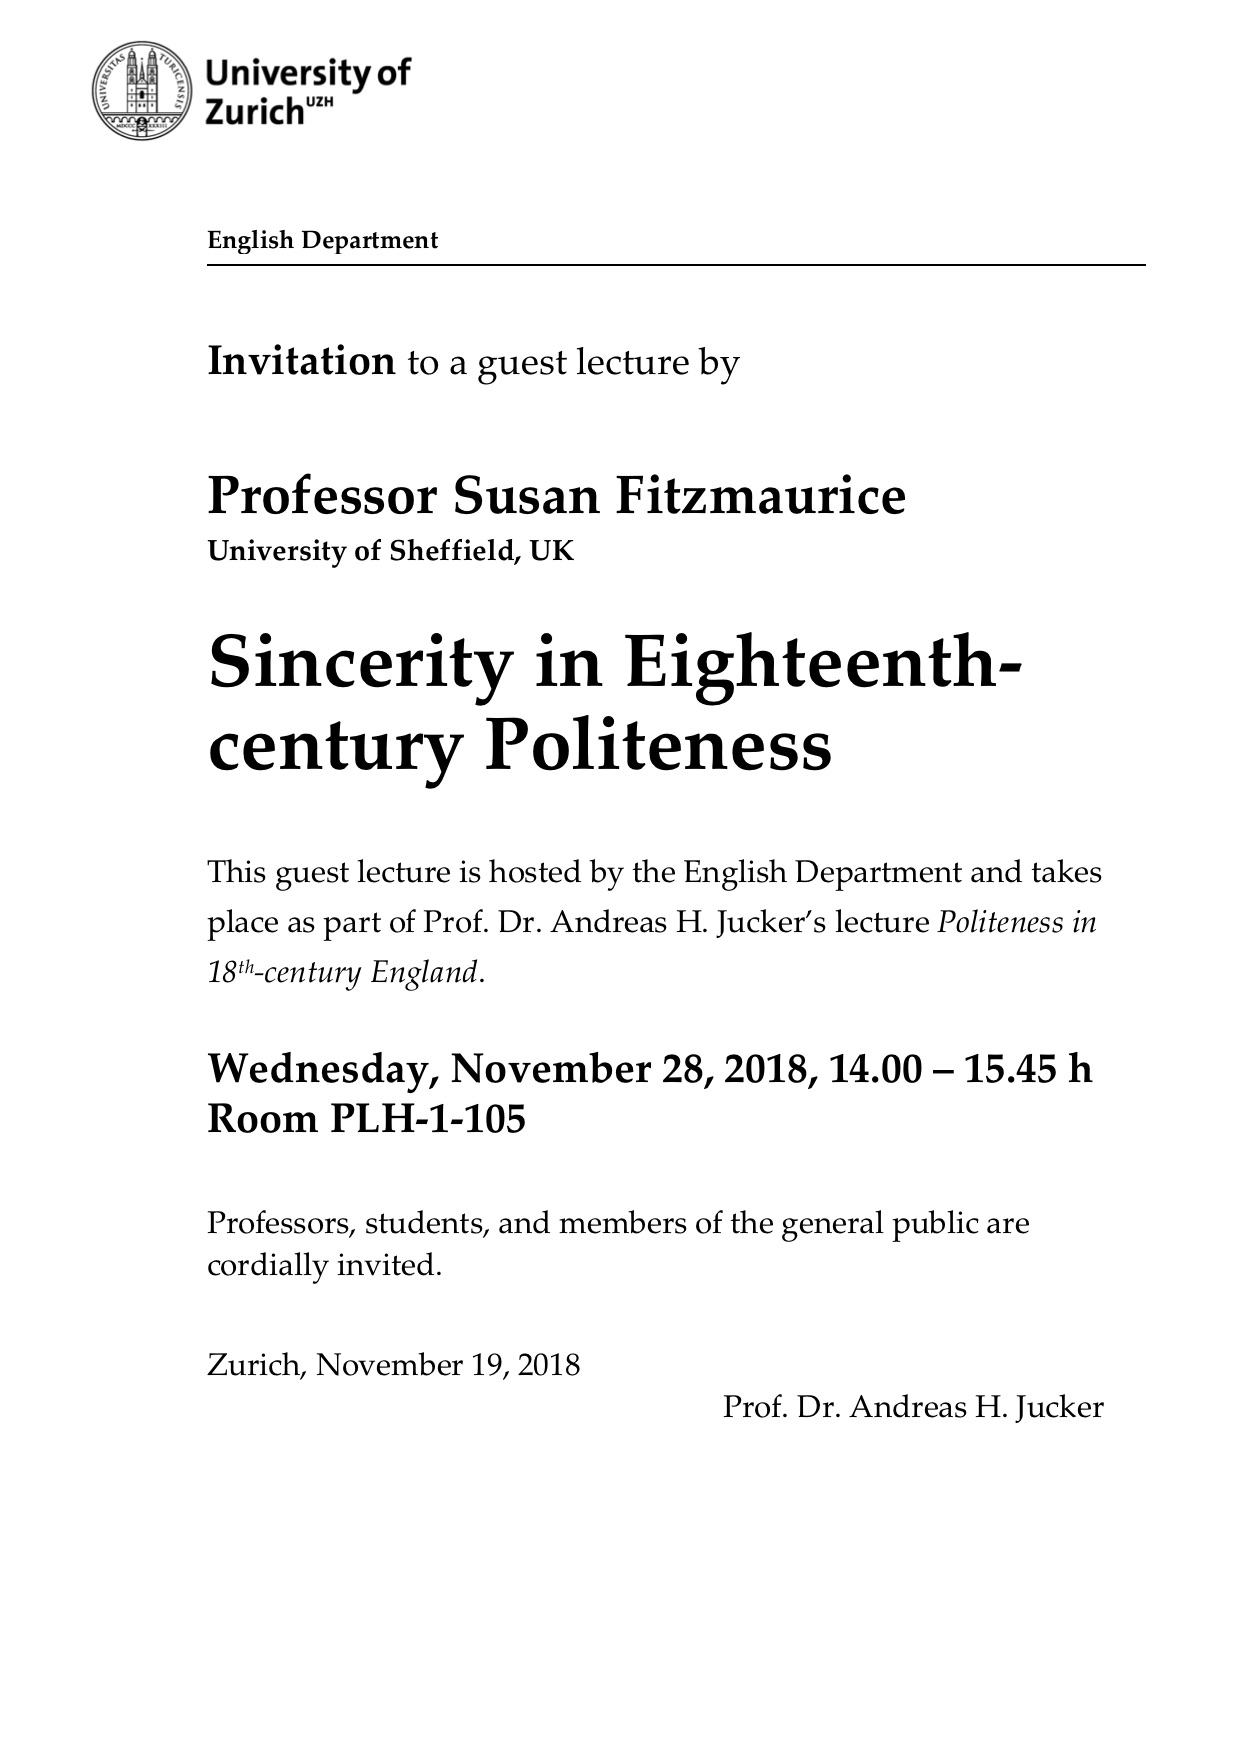 Flyer Guest Lecture Prof. Susan Fitzmaurice (University of Sheffeld, UK)